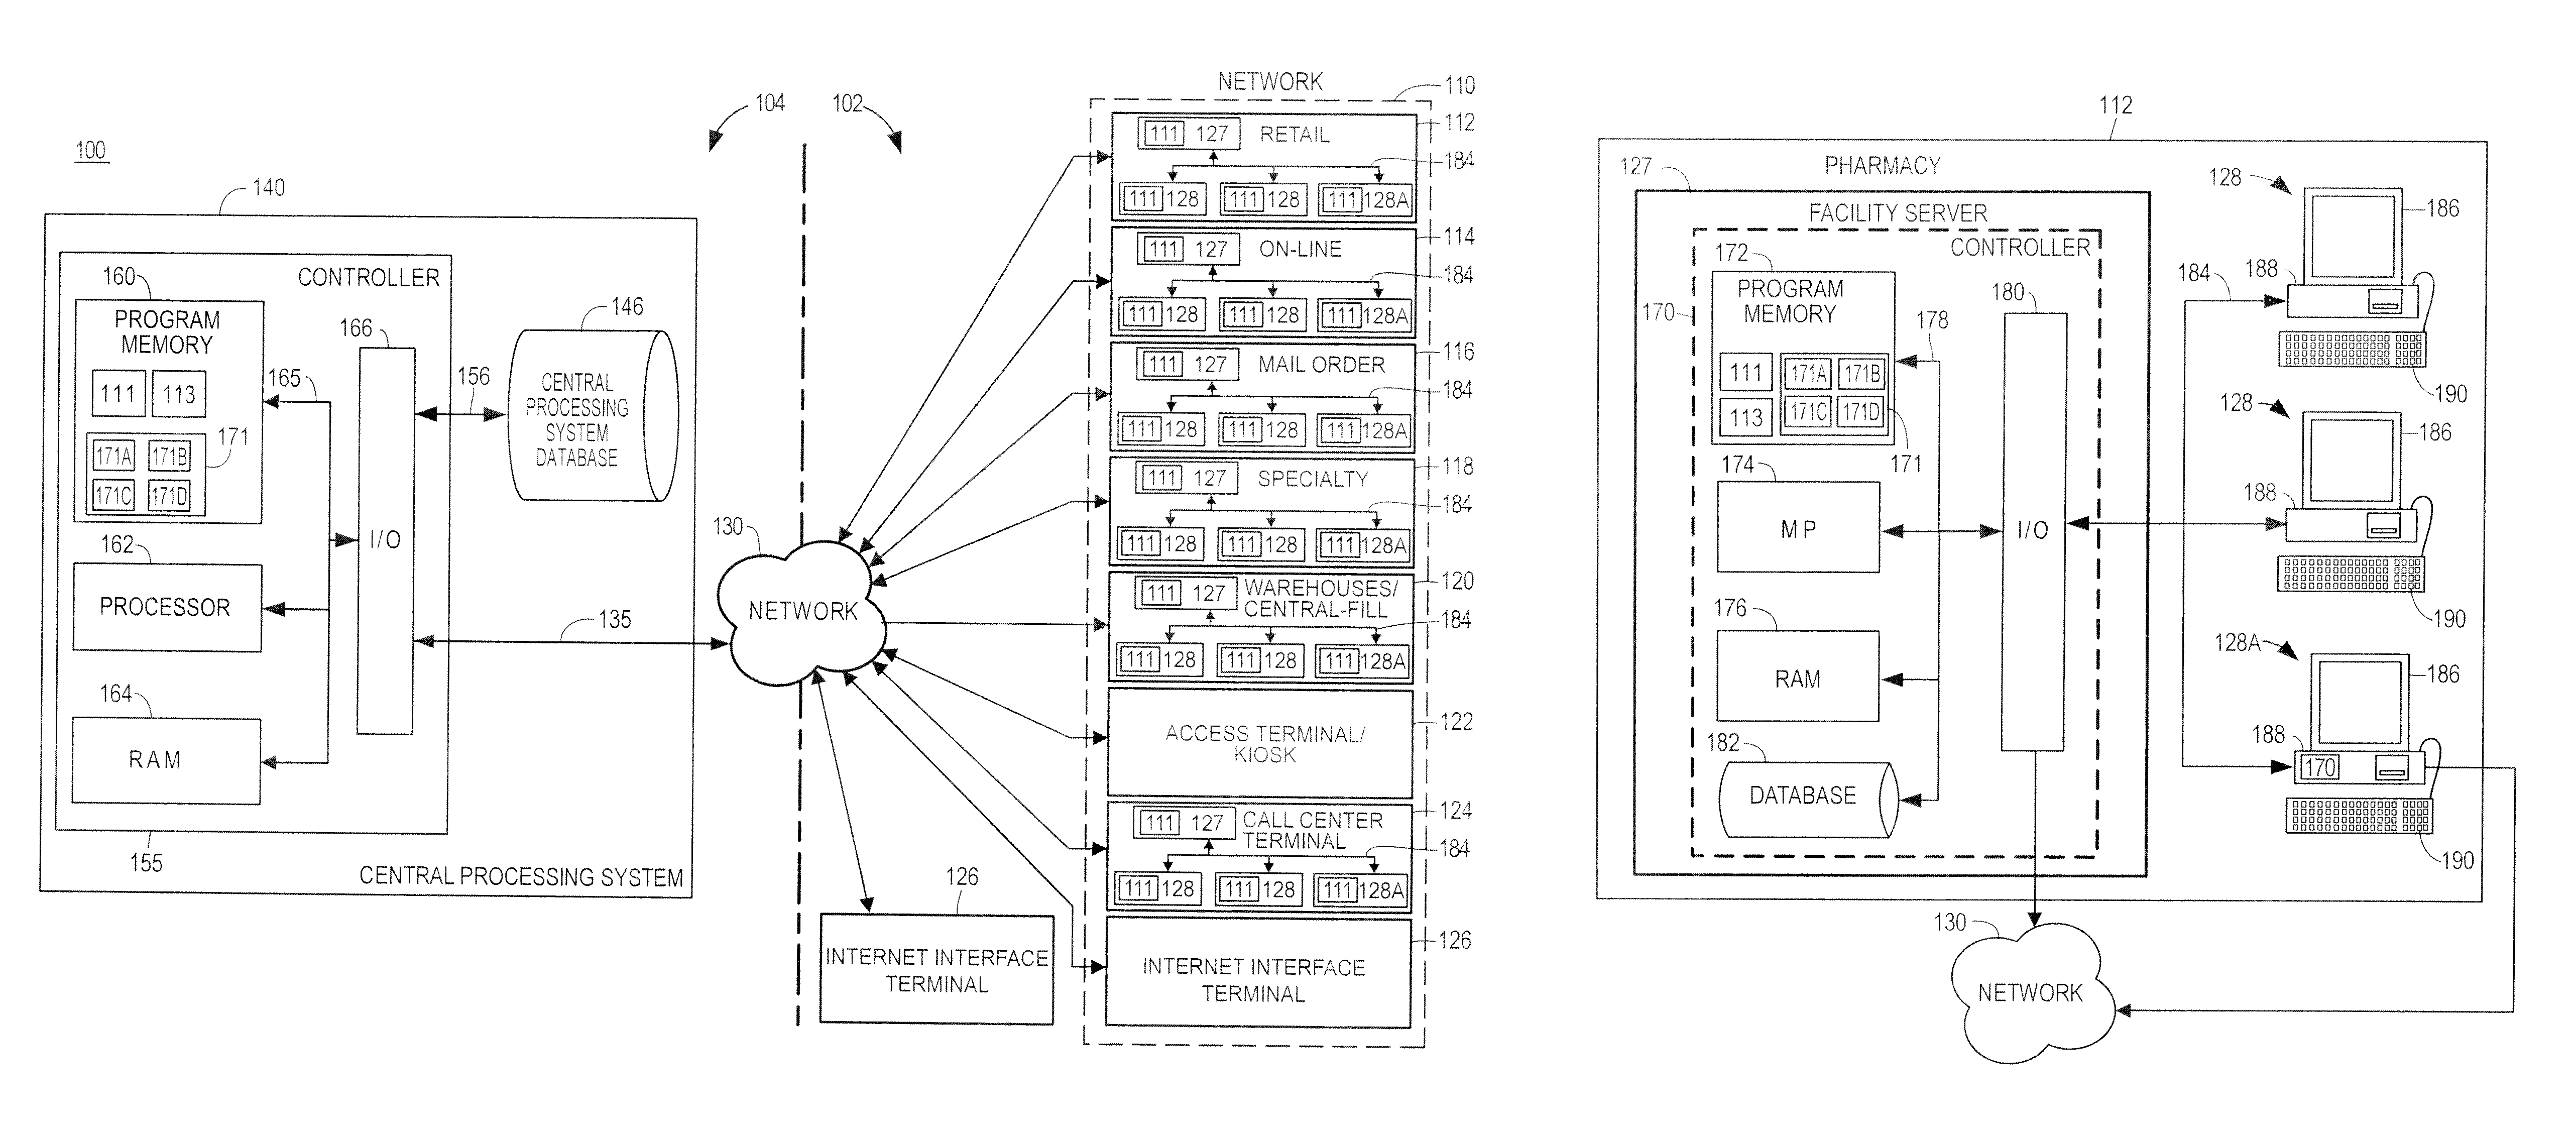 Method and system for enrolling in a medication compliance packaging program